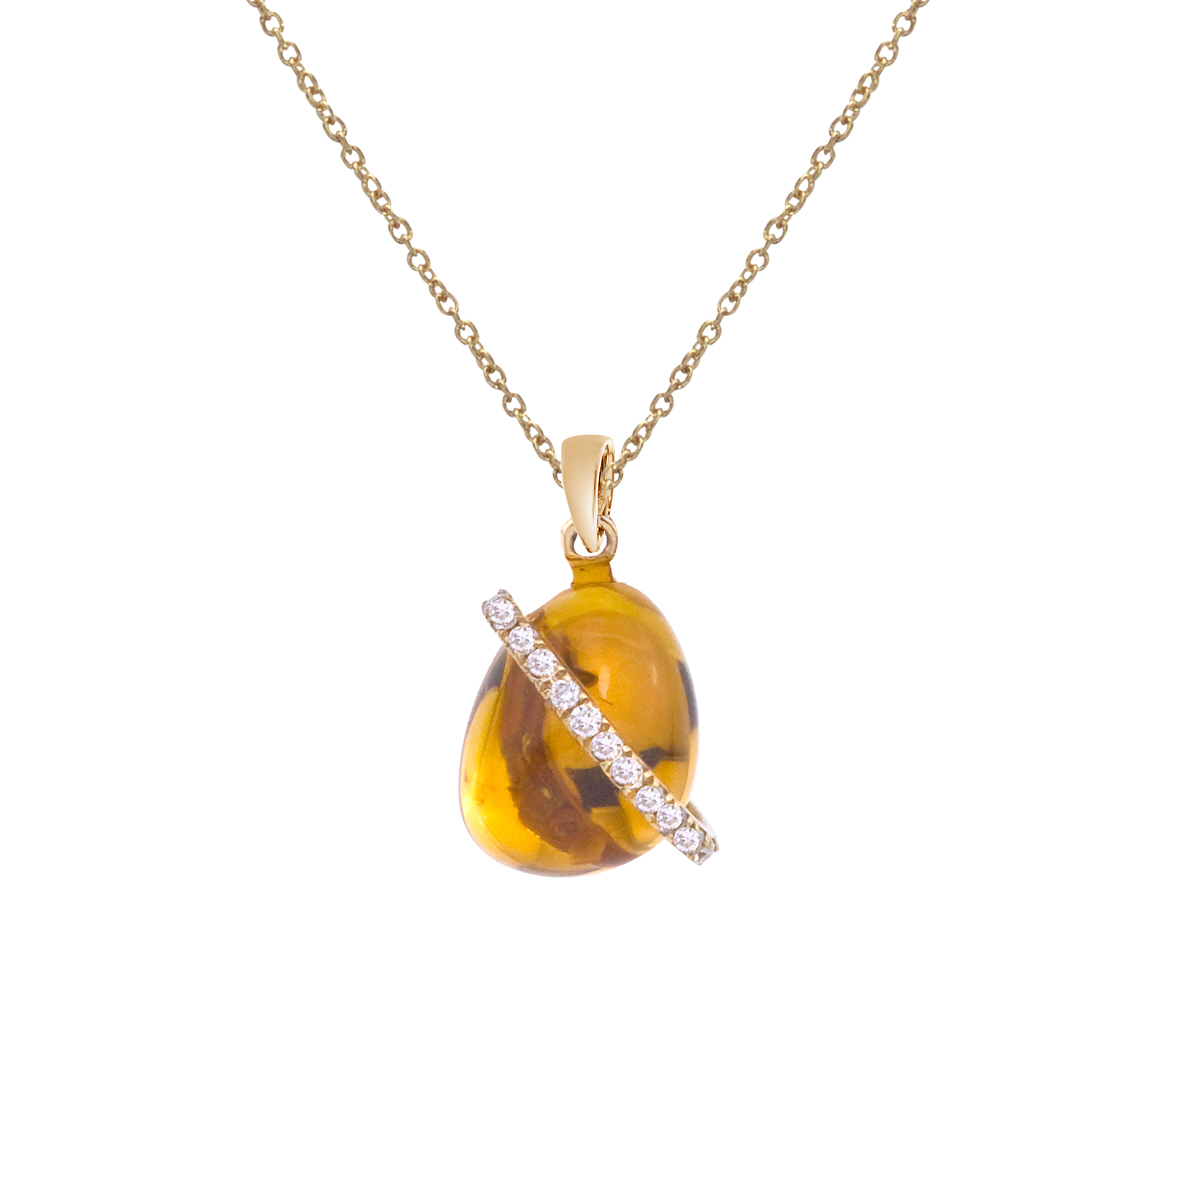 JCX2608: A luminous 9x7 mm cabochon citrine pendant with a ring of bright diamonds set in 14k yellow gold.